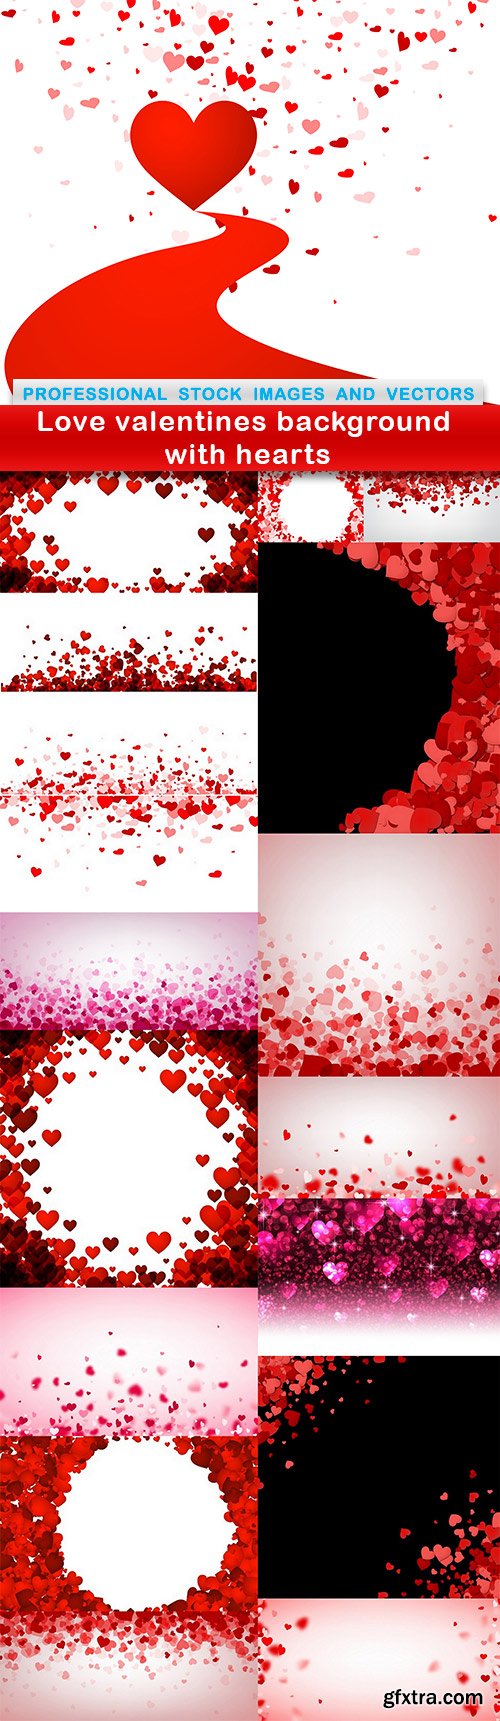 Love valentines background with hearts - 17 EPS